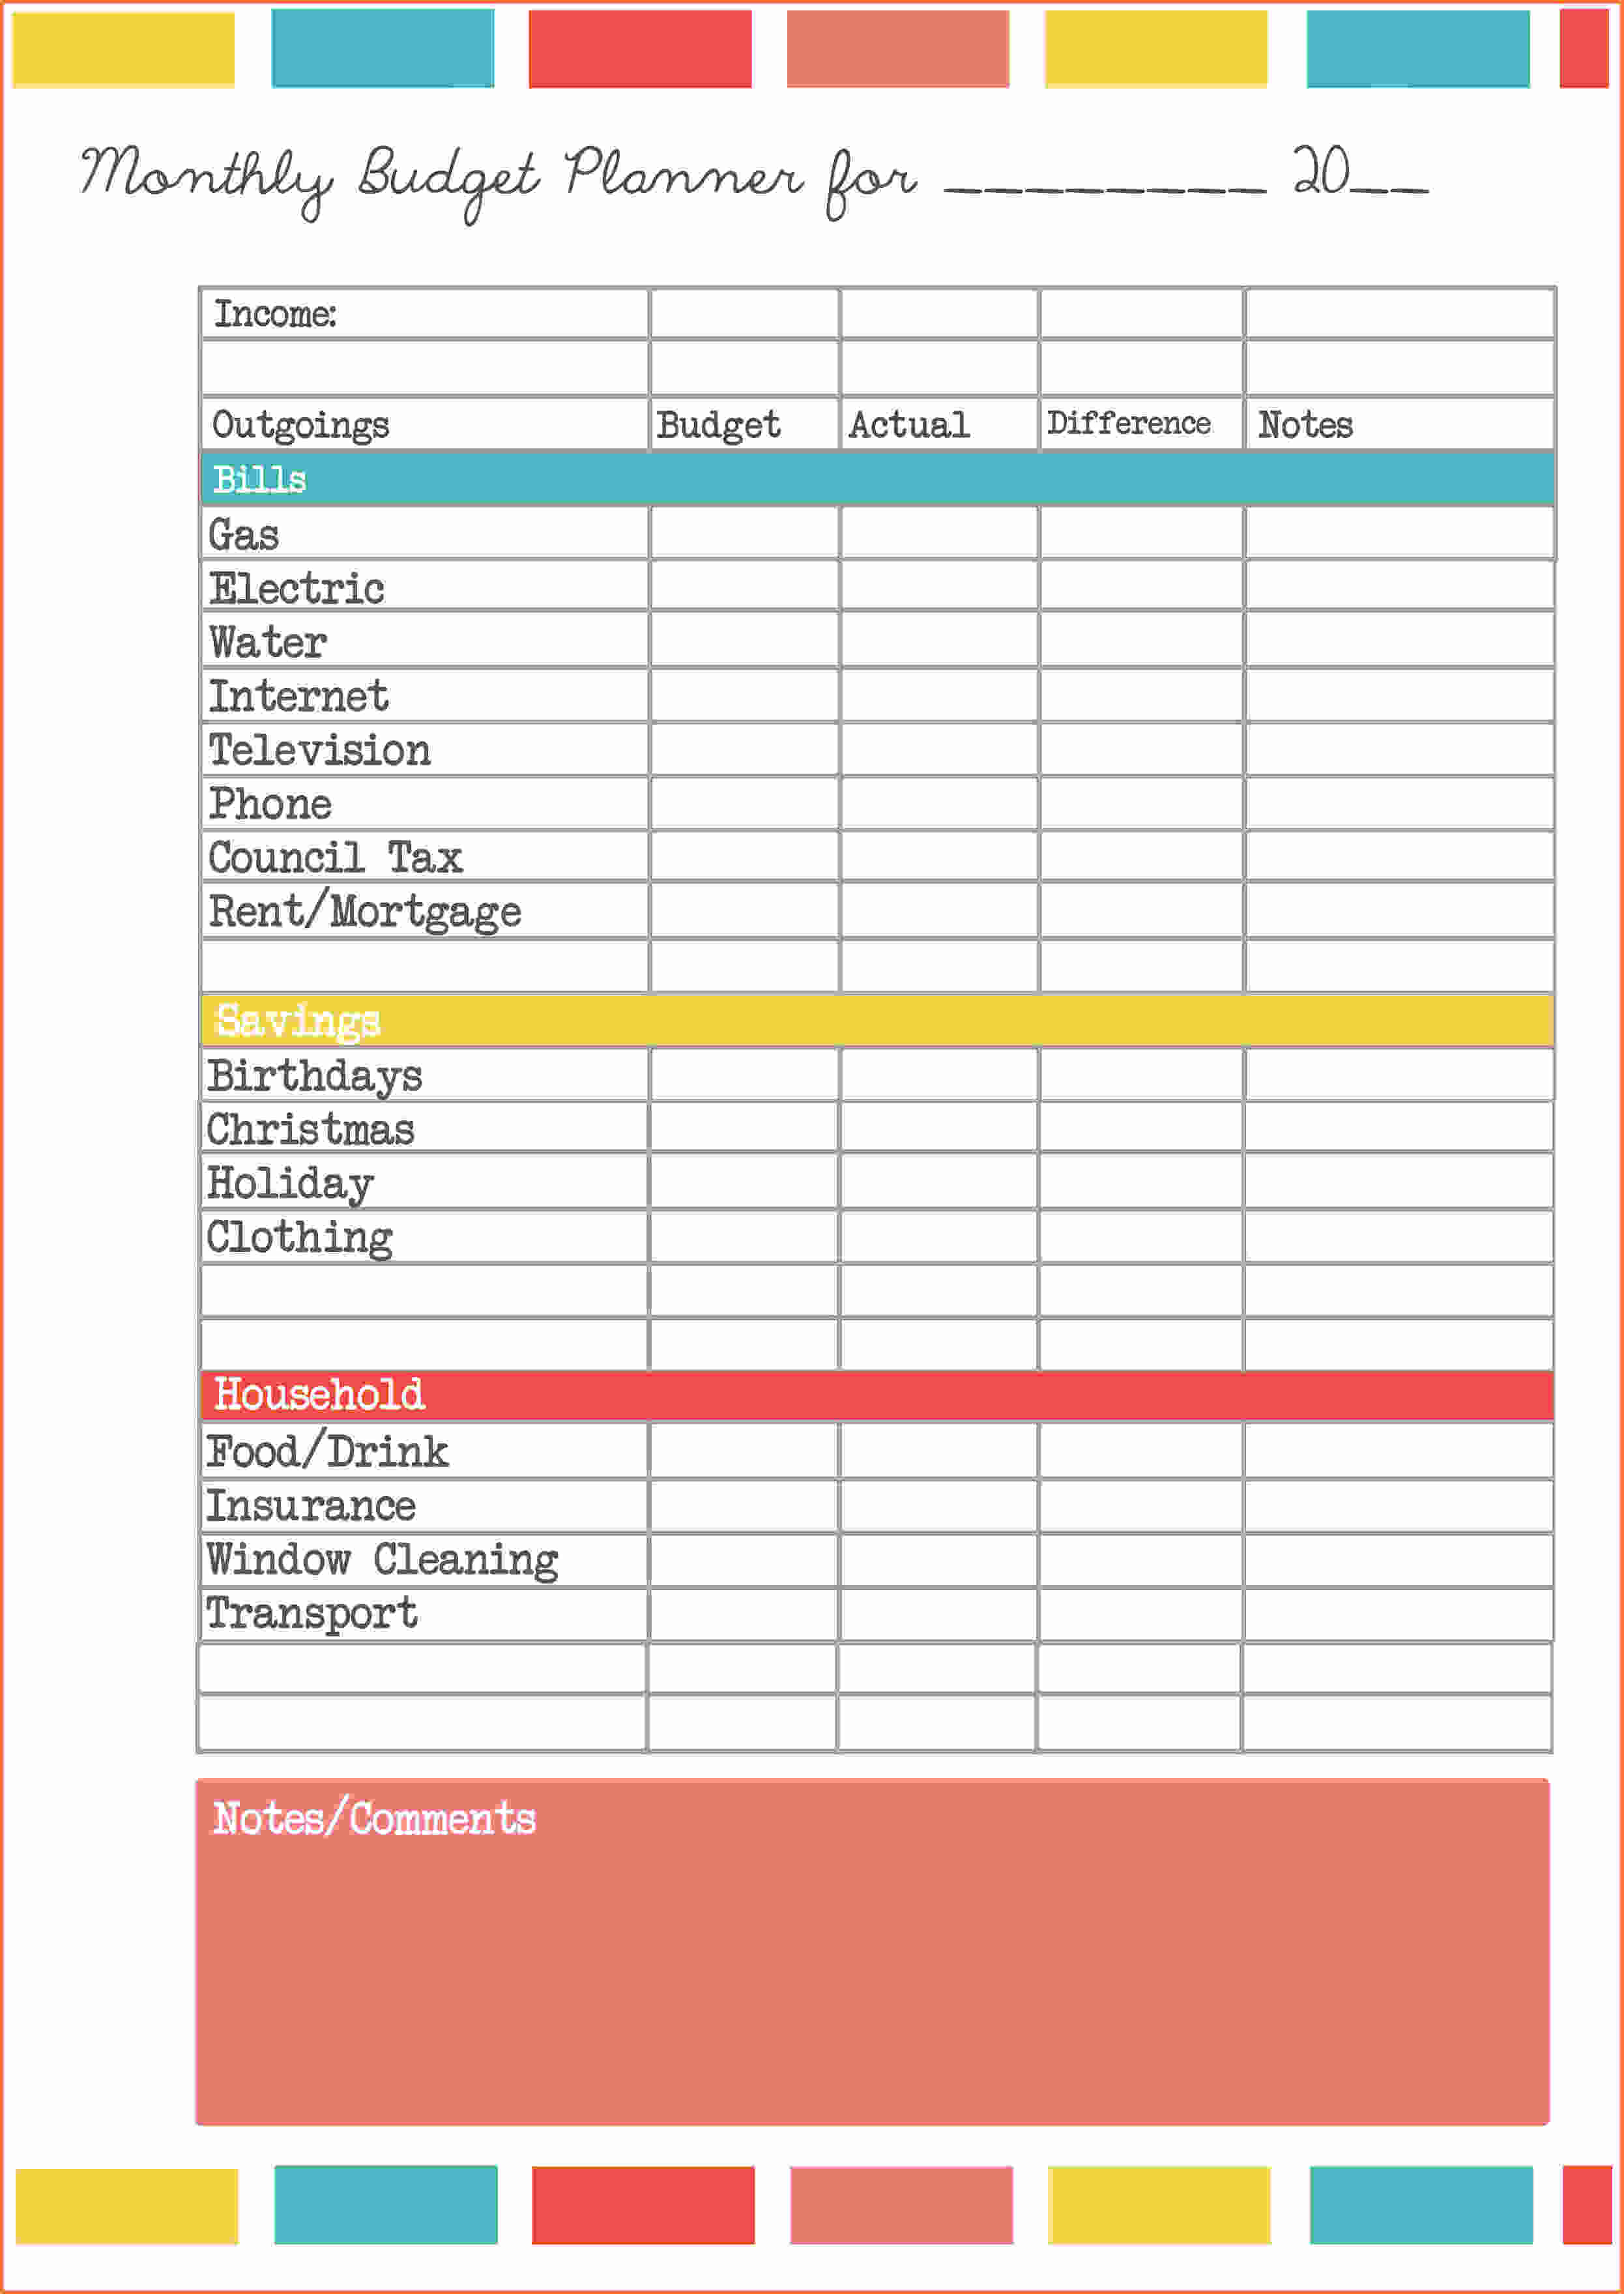 Household Financial Planning Spreadsheet In Budget Planning Spreadsheet Invoice Template Planner Printable